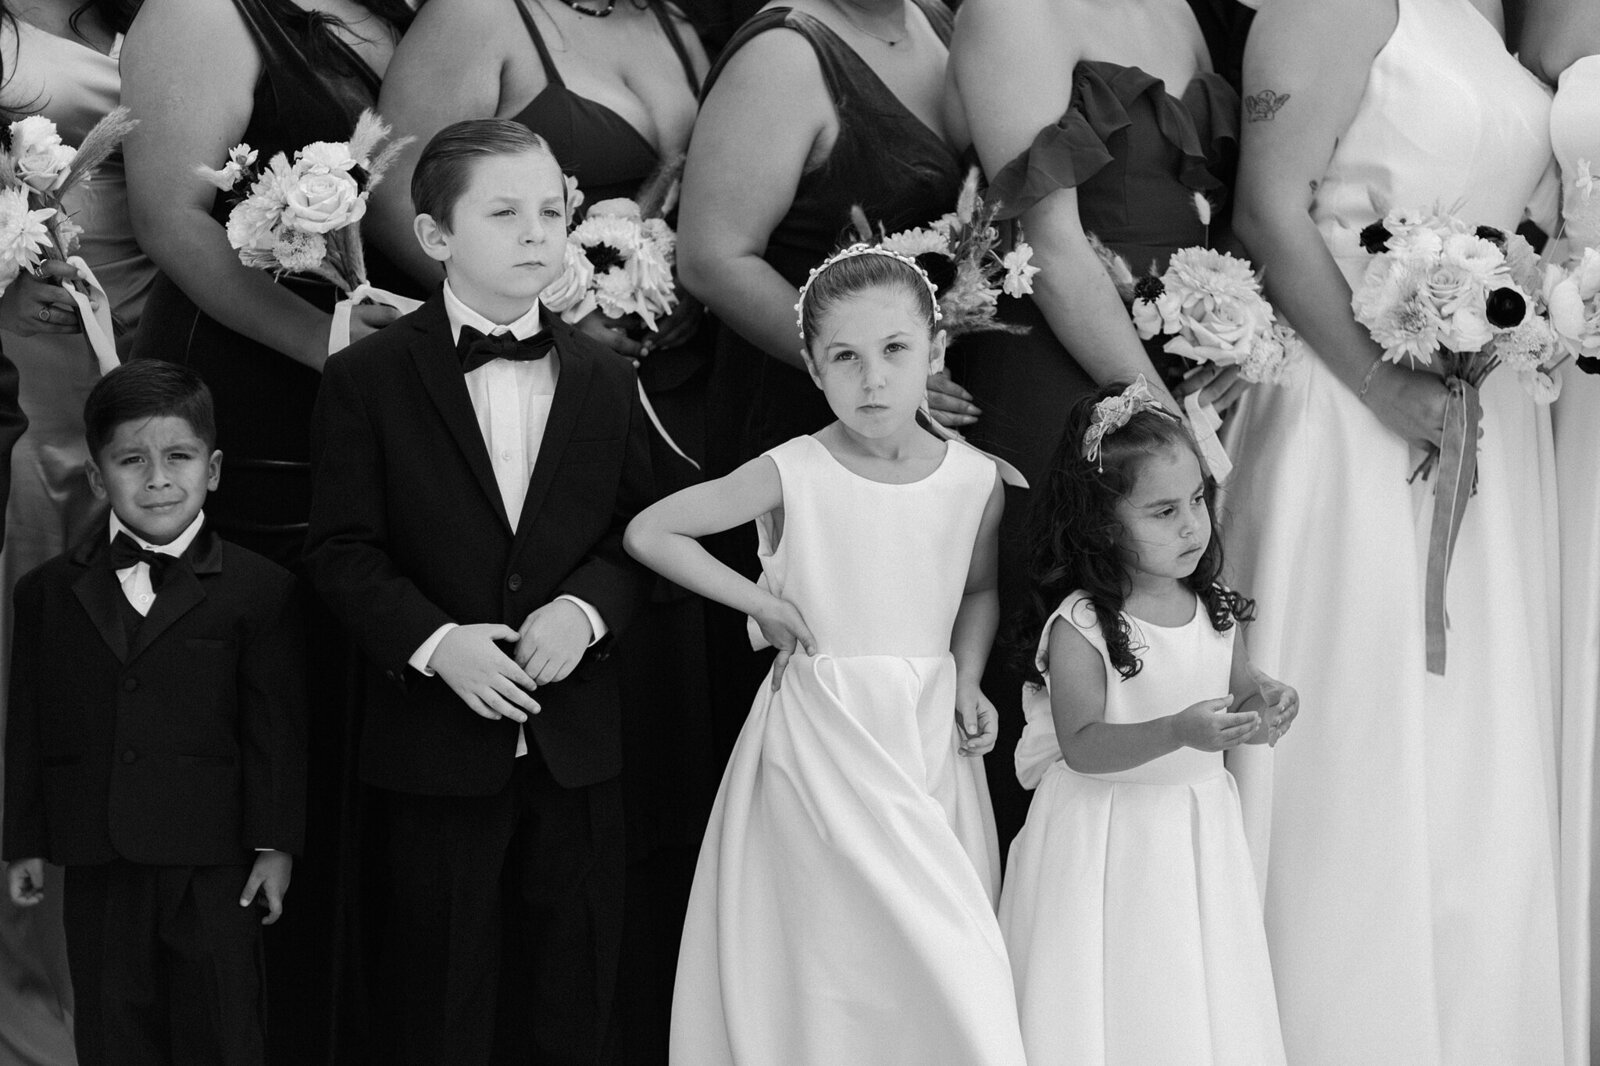 A photojournalistic candid photo of four child attendants during a wedding ceremony in Dallas, Texas. The boys are wearing tuxedos with black bowties while the girls are wearing sleeveless, light colored dresses and floral headbands. One girl and boy watch the ceremony patiently while another girl and boy look impatiently right at the camera. The bridesmaids and bride can be seen lined up behind them.